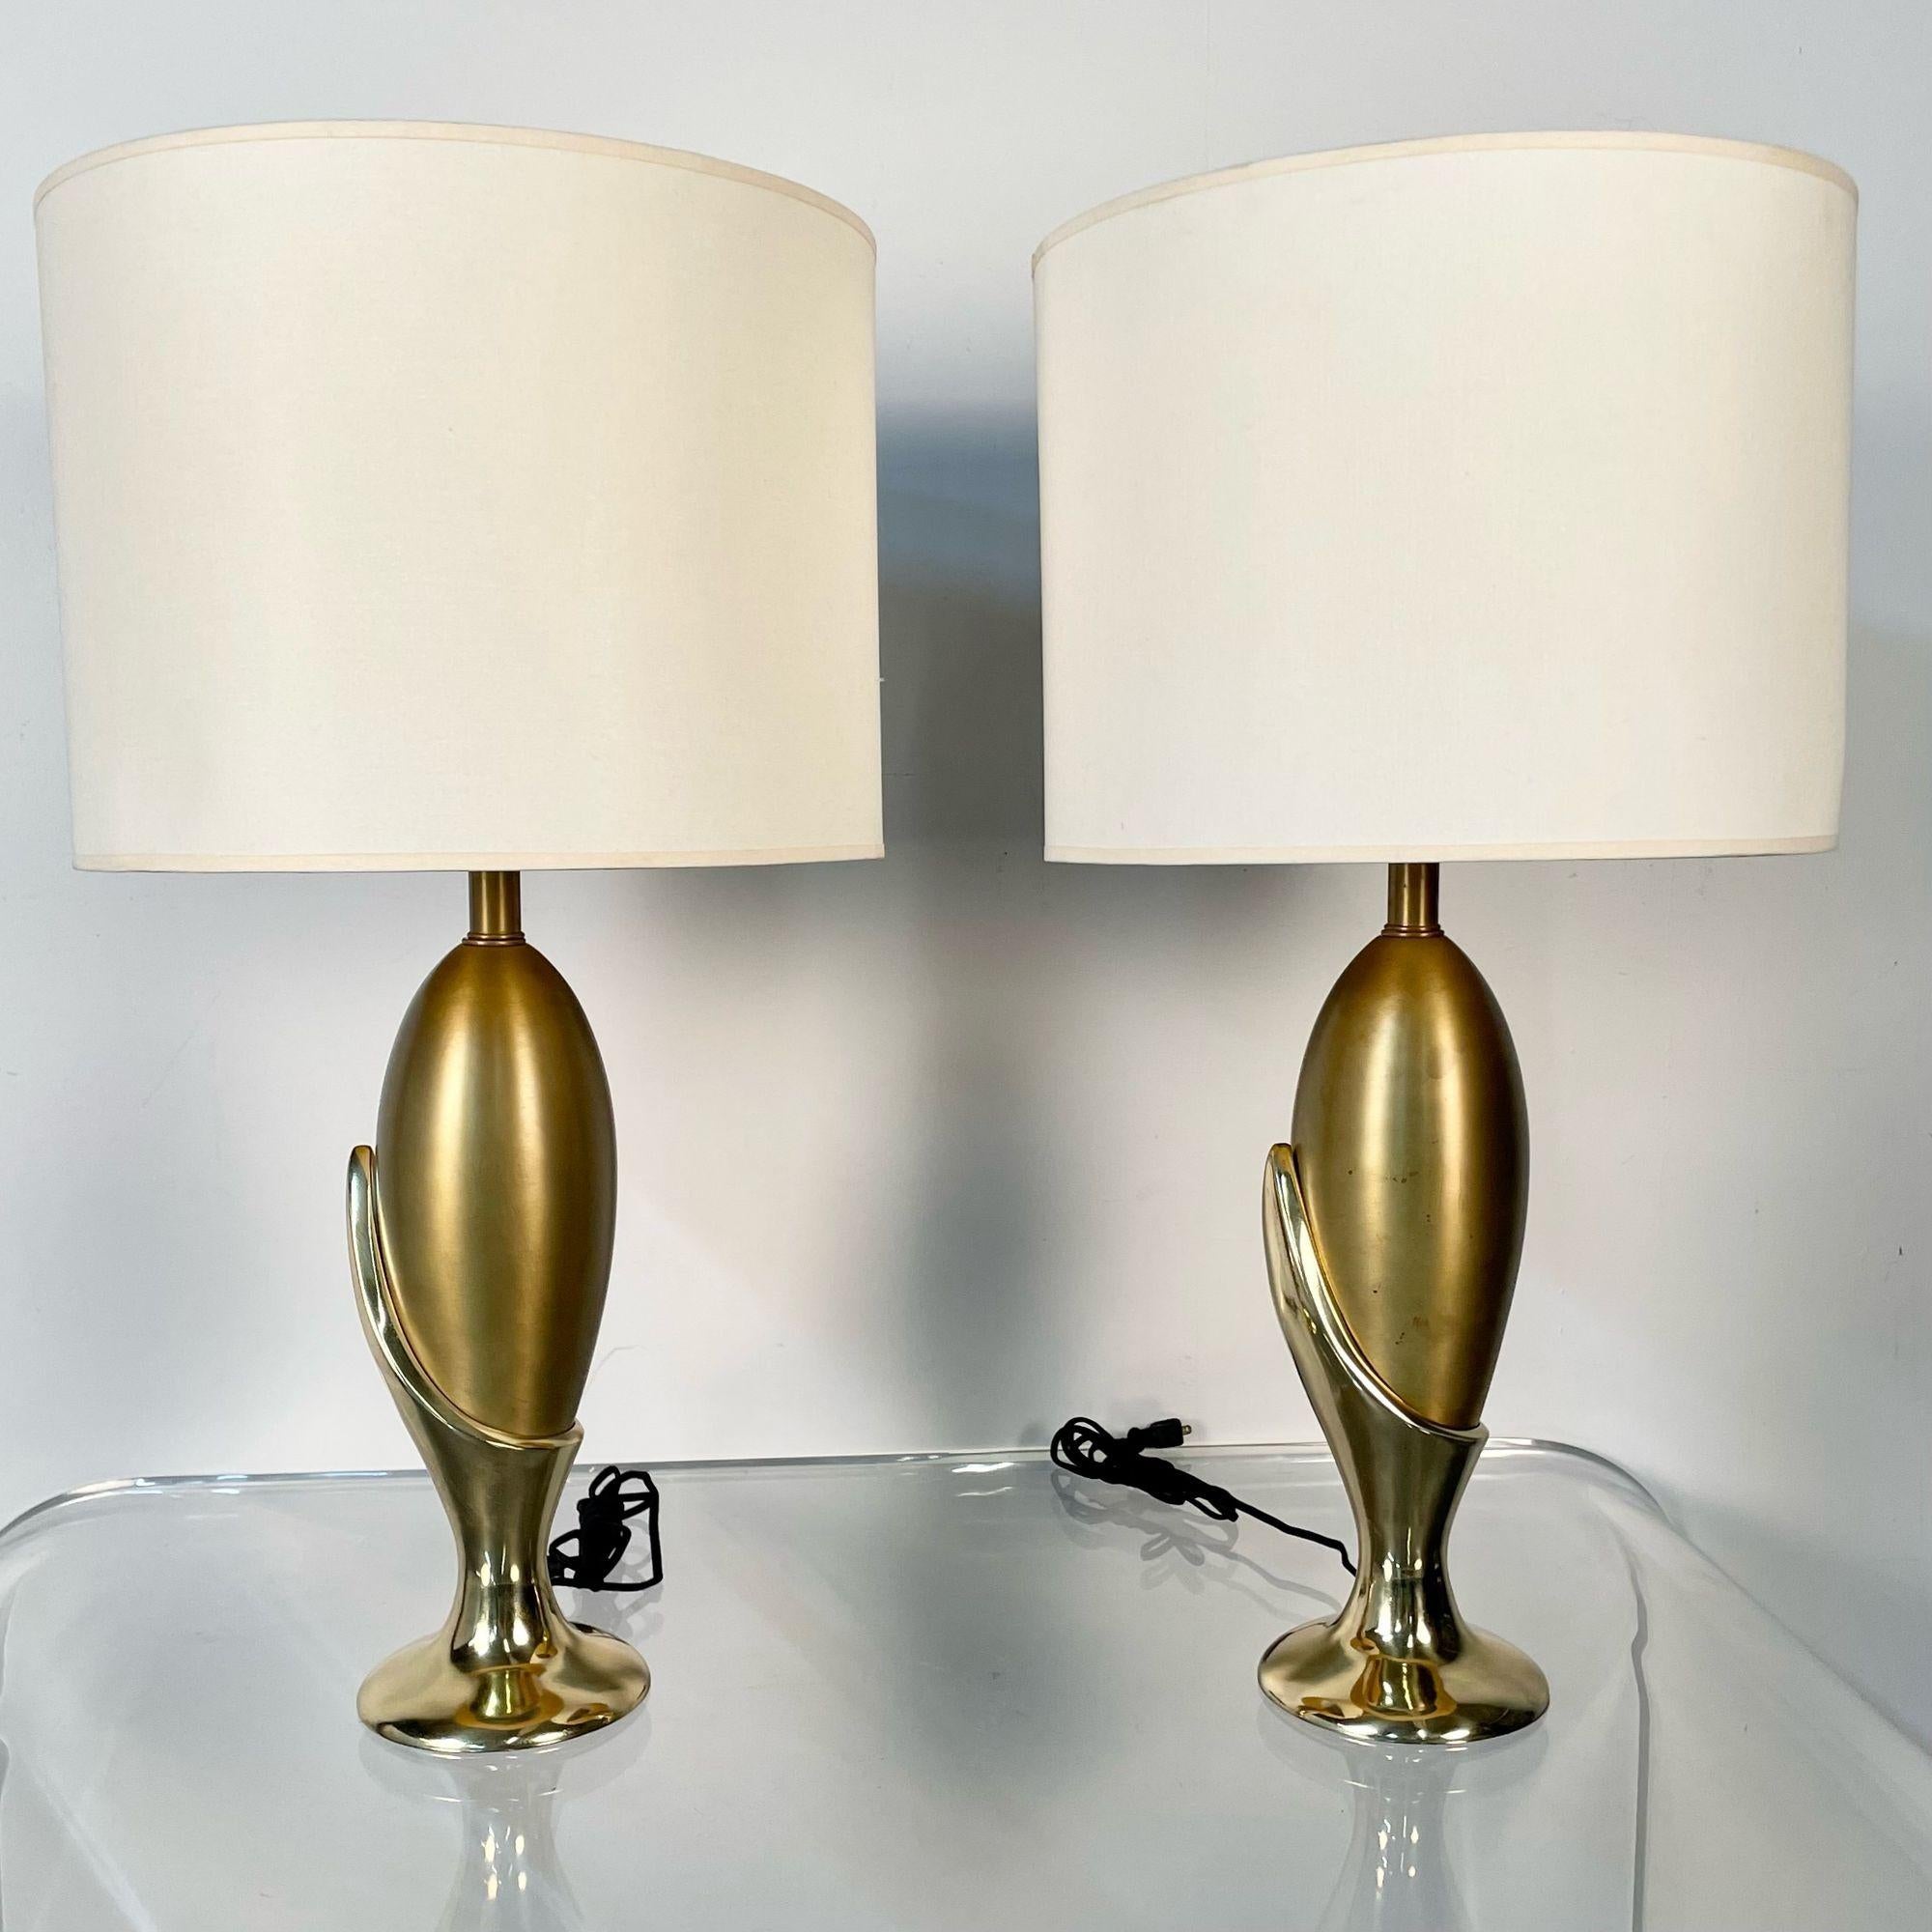 Pair of French Mid-Century Modern Sculptural Bronze Table / Desk Lamps
 
A pair of sculptural cast bronze table lamps in brushed bronze resting on polished bronze bases. Shades not included.
EHXX
Bronze
French c. 1980's
 
20